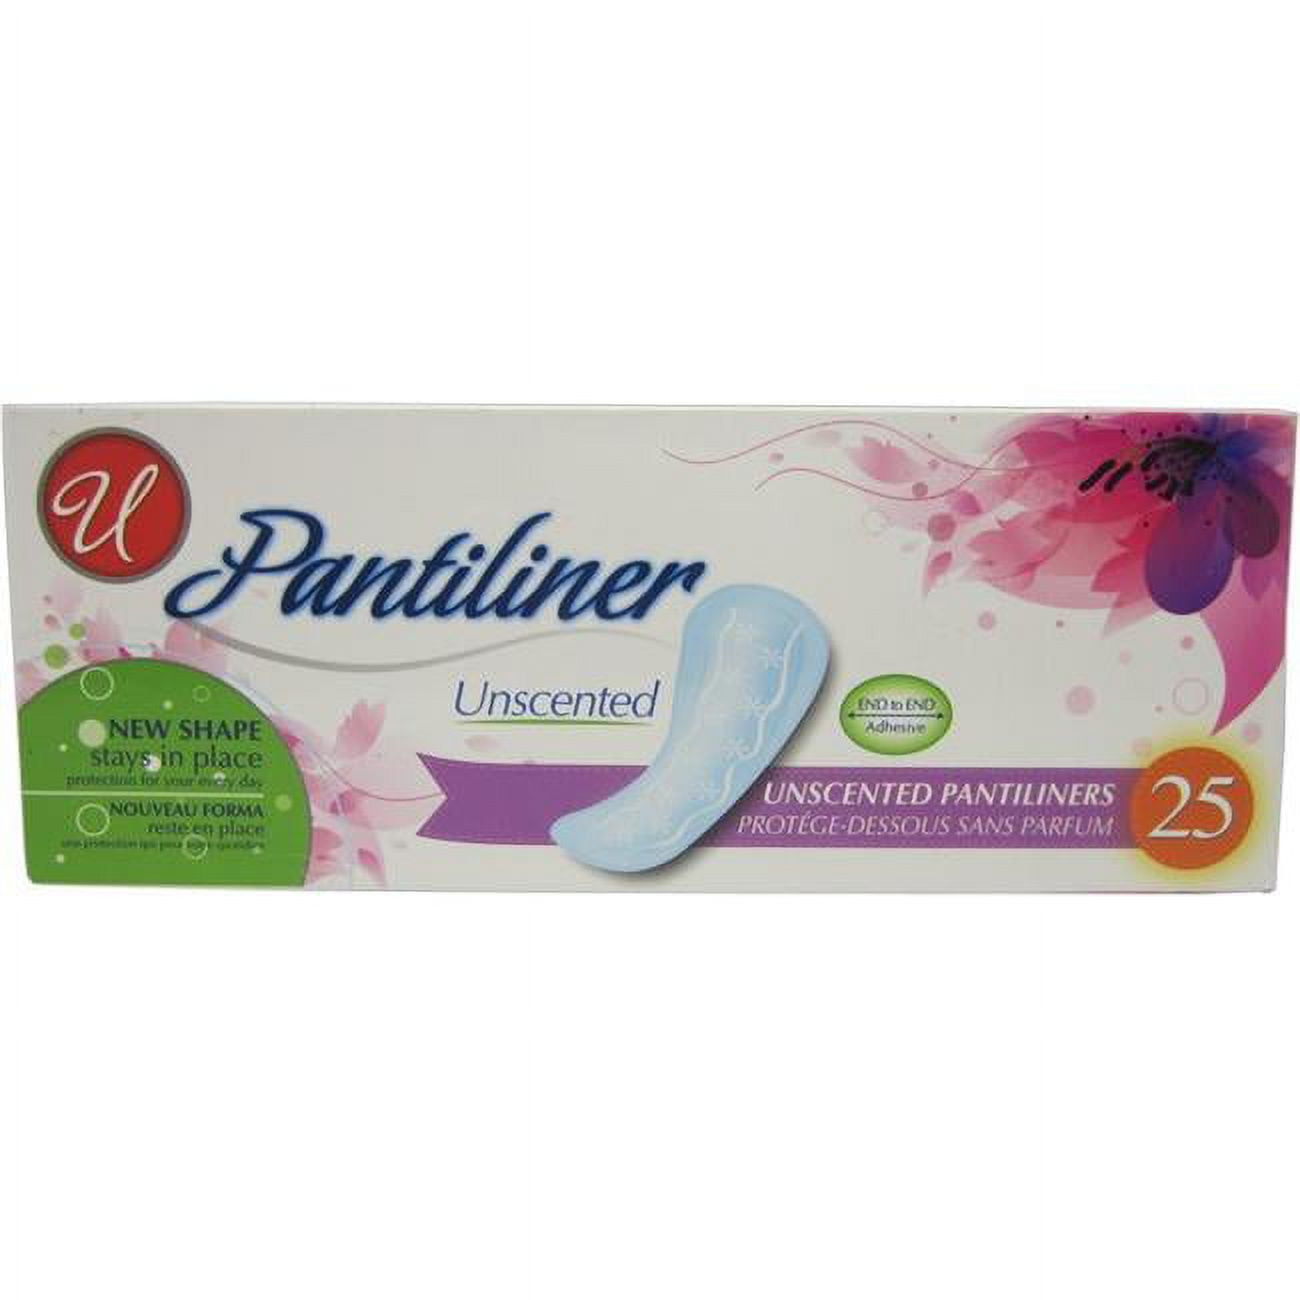 Picture of DDI 2290795 Unscented Pantiliners 25 Count Case of 24